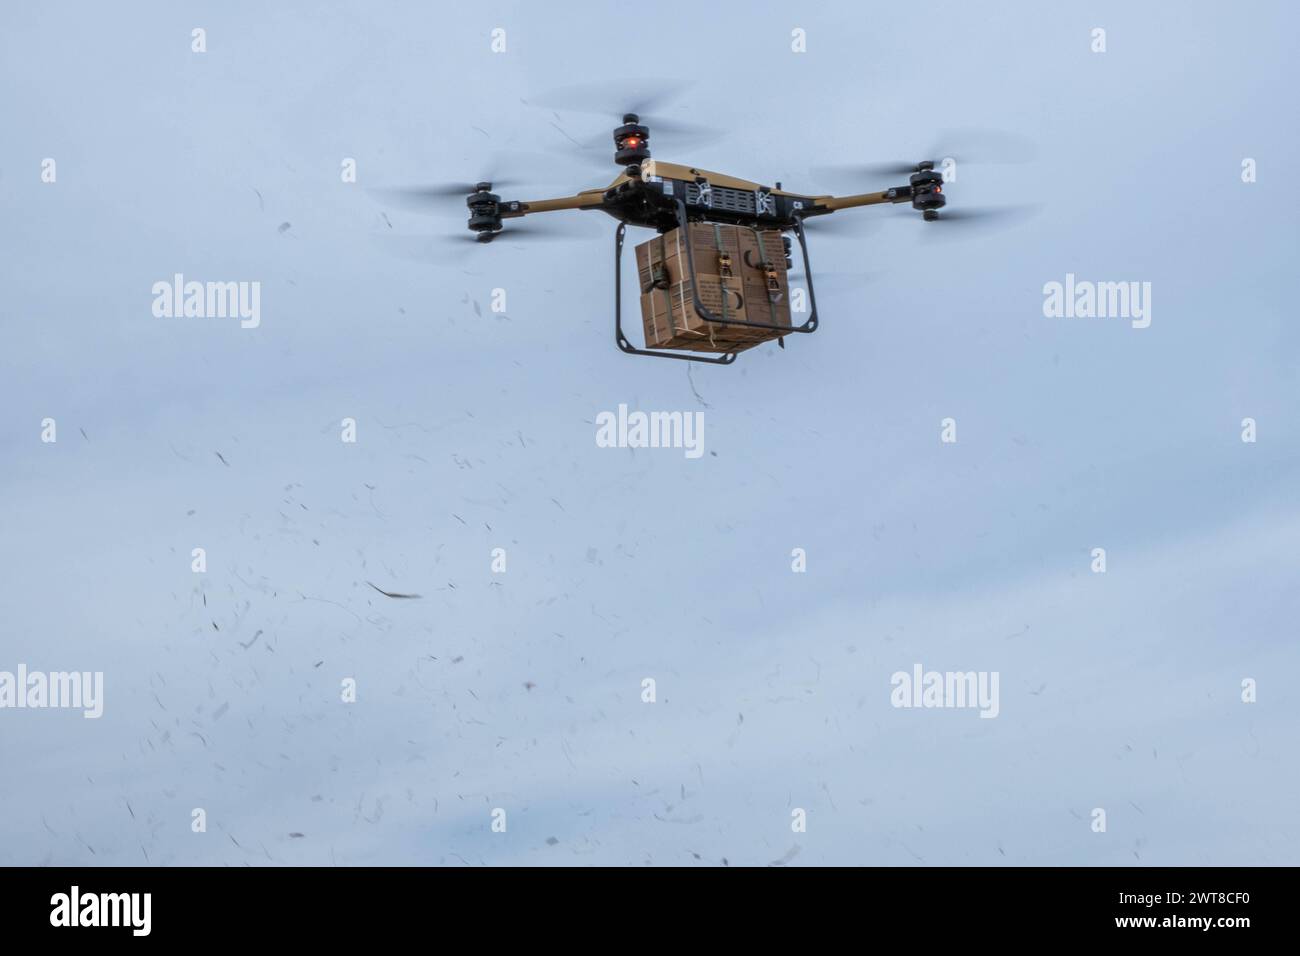 Fort Drum, United States. 03 May, 2024. A cargo of Meals, Ready-to-Eat lifts off using a TRV 150, Tactical Resupply Vehicle, during training with the U.S Army 10th Mountain Division at Fort Drum, March 5, 2024, in Fort Drum, New York. The new electric supply drones can deliver up to 440-pounds of payload during battlefield conditions.  Credit: SFC Neysa Canfield/U.S Army/Alamy Live News Stock Photo